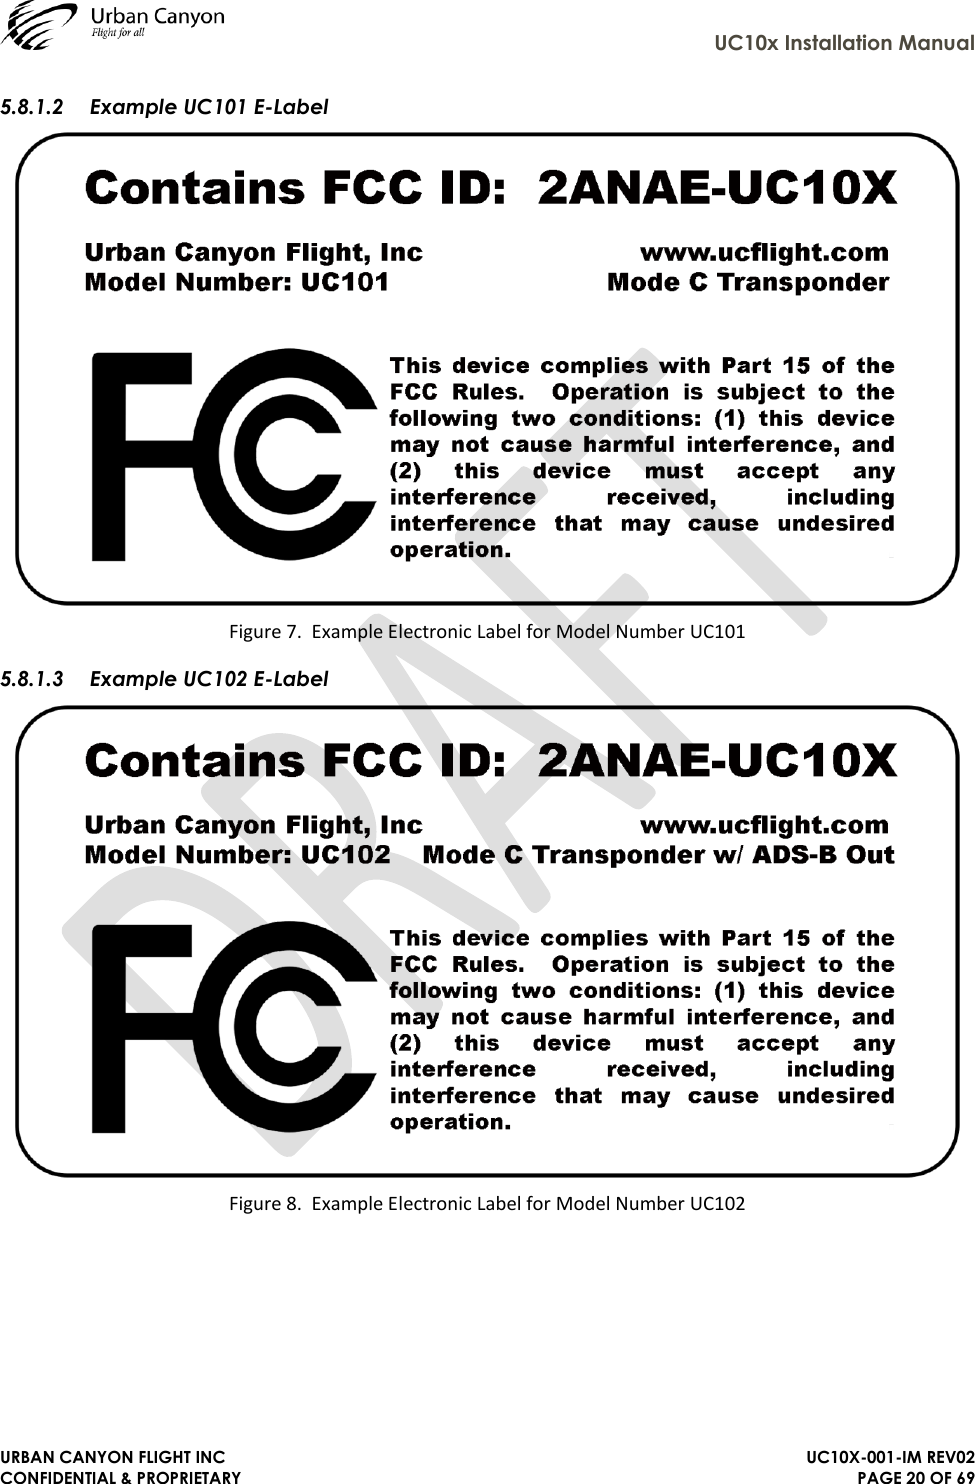     UC10x Installation Manual  URBAN CANYON FLIGHT INC   UC10X-001-IM REV02 CONFIDENTIAL &amp; PROPRIETARY PAGE 20 OF 69 5.8.1.2 Example UC101 E-Label  Figure 7.  Example Electronic Label for Model Number UC101 5.8.1.3 Example UC102 E-Label  Figure 8.  Example Electronic Label for Model Number UC102 